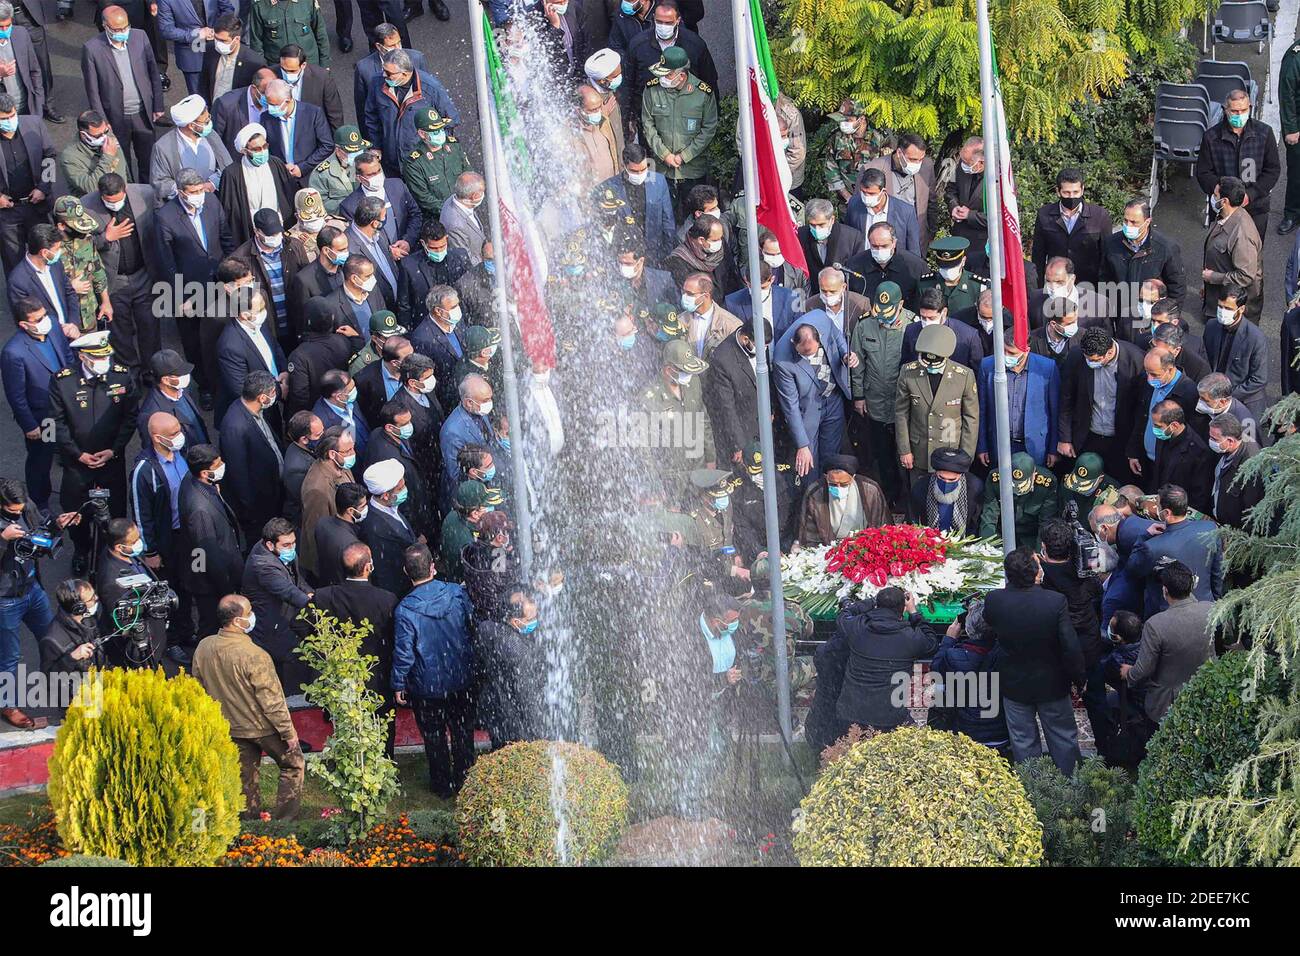 Tehran, Iran. 30th Nov, 2020. A handout photo made available by the Iranian defense ministry office shows mourners at the coffin of slain Iranian nuclear scientist Mohsen Fakhrizadeh during funeral procession inside the Iranian defense ministry in Tehran, Iran, Monday, November 30. 2020. Iranian officials have blamed Israel for the killing of Fakhrizadeh who led Tehran's disbanded military nuclear program. Photo by Iranian Defense Ministry/UPI Credit: UPI/Alamy Live News Stock Photo